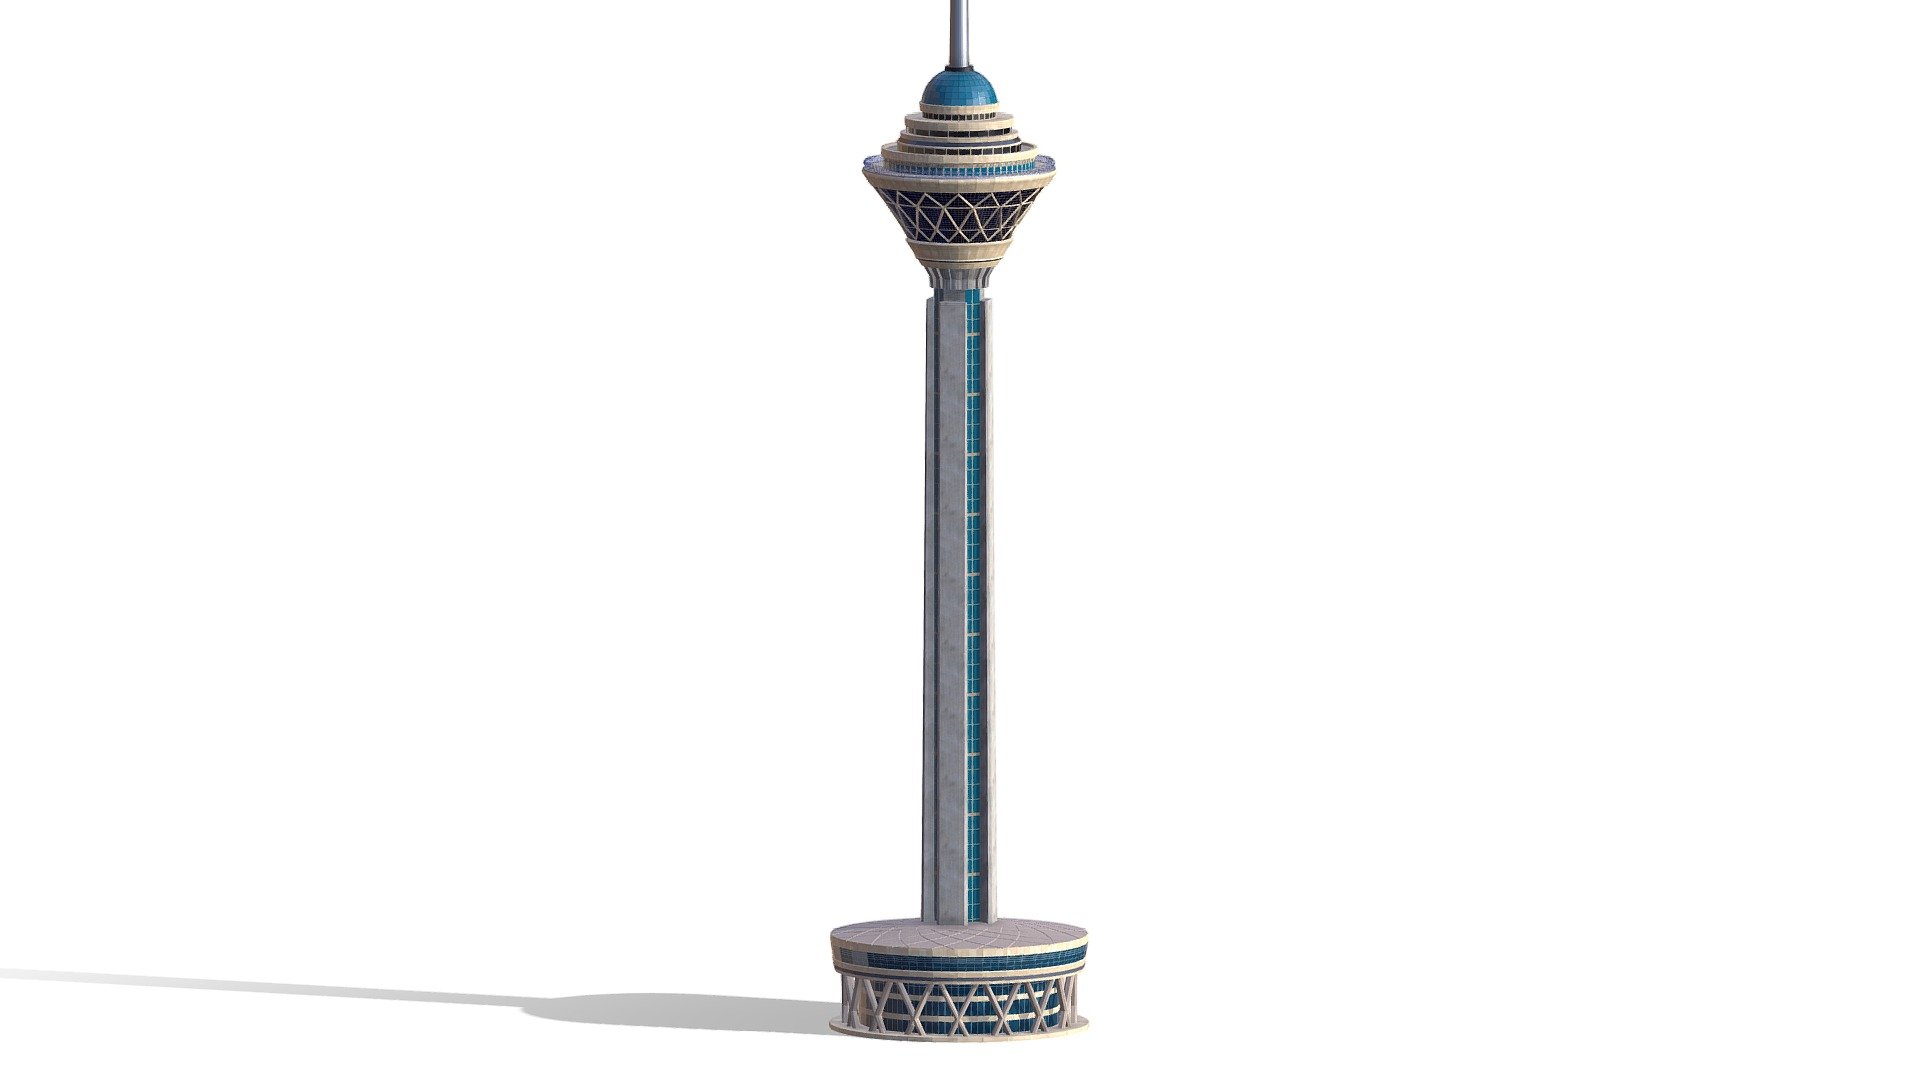 The Milad Tower, also known as the Tehran Tower, is a multi-purpose tower in Tehran, Iran. It is the sixth-tallest tower and the 24th-tallest freestanding structure in the world 3d model